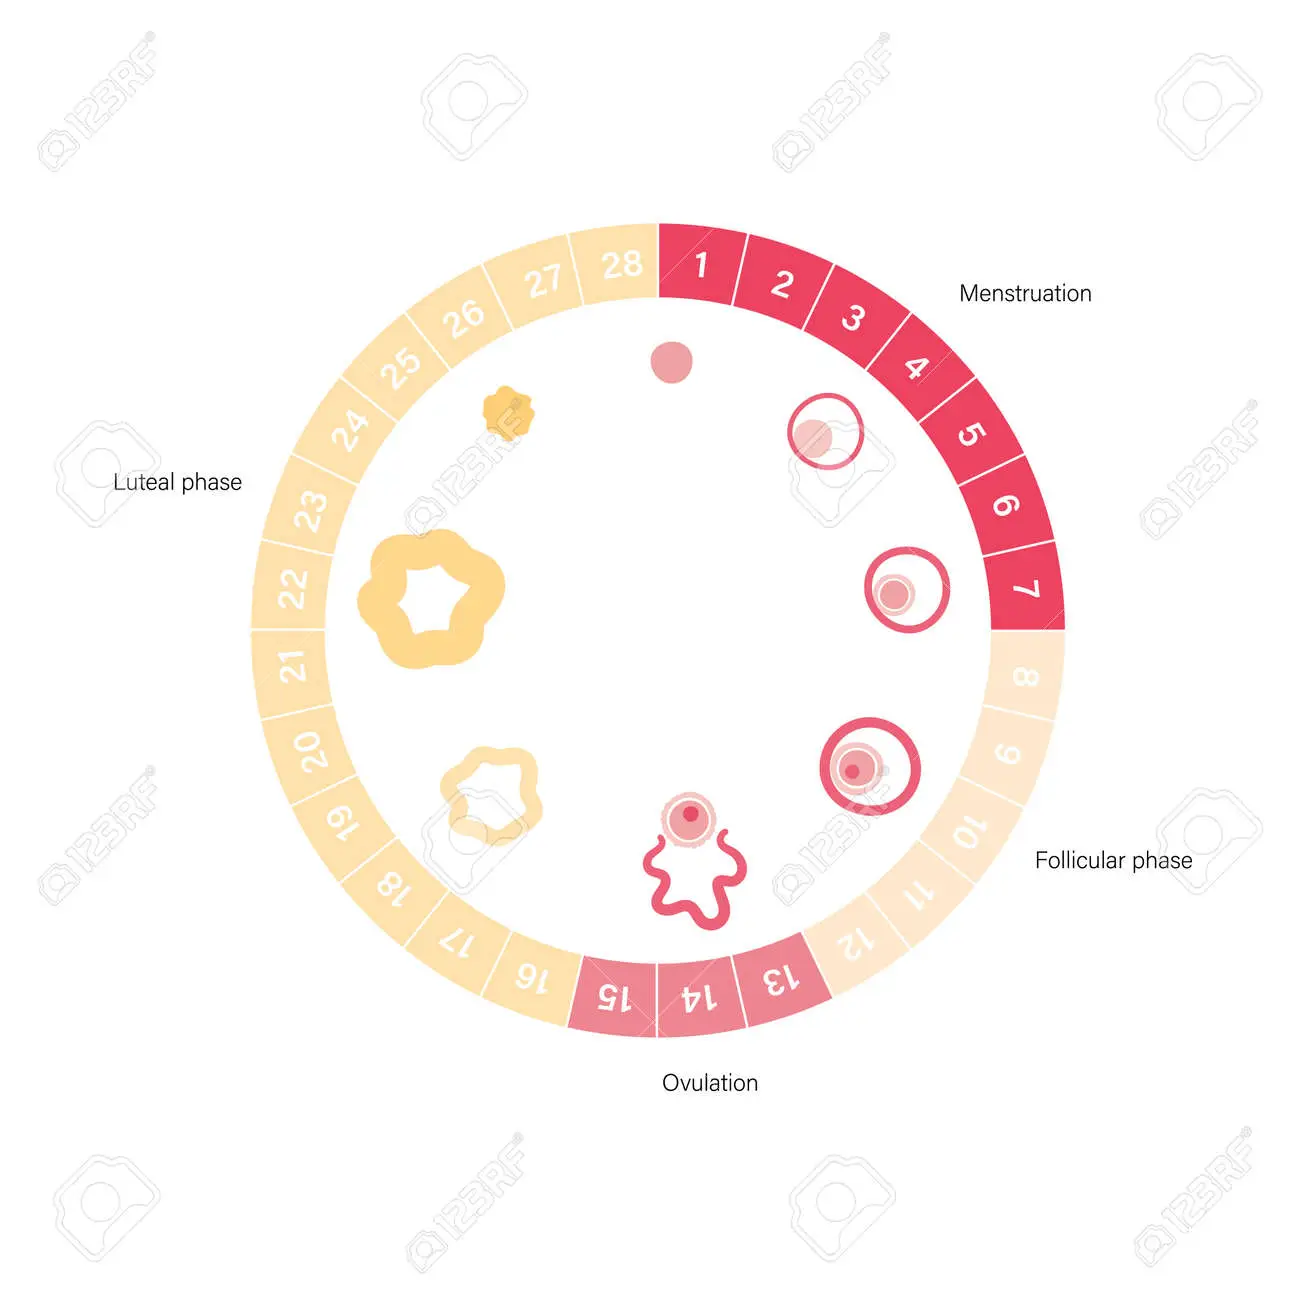 Diagram illustrating the phases of the menstrual cycle and corresponding hormonal changes